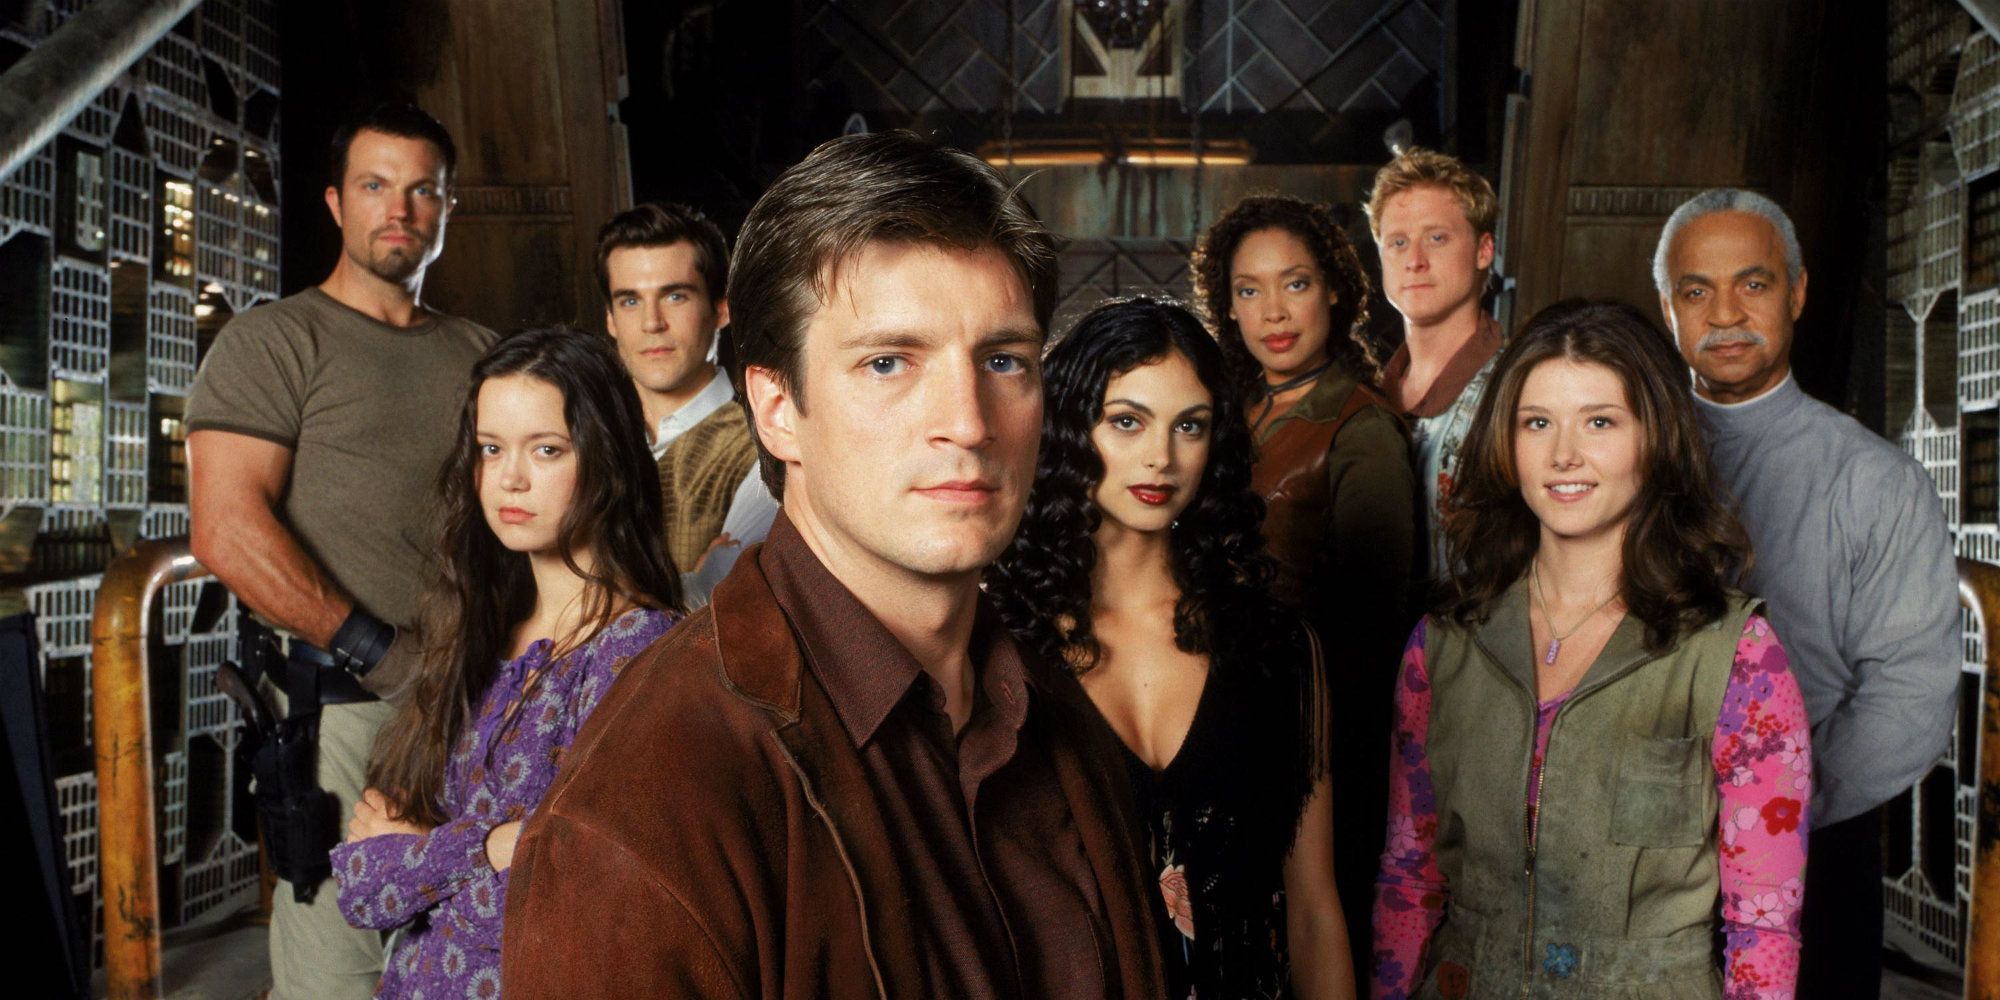 The cast of characters from the 2002 sci-fi series Firefly standing together in a spaceship